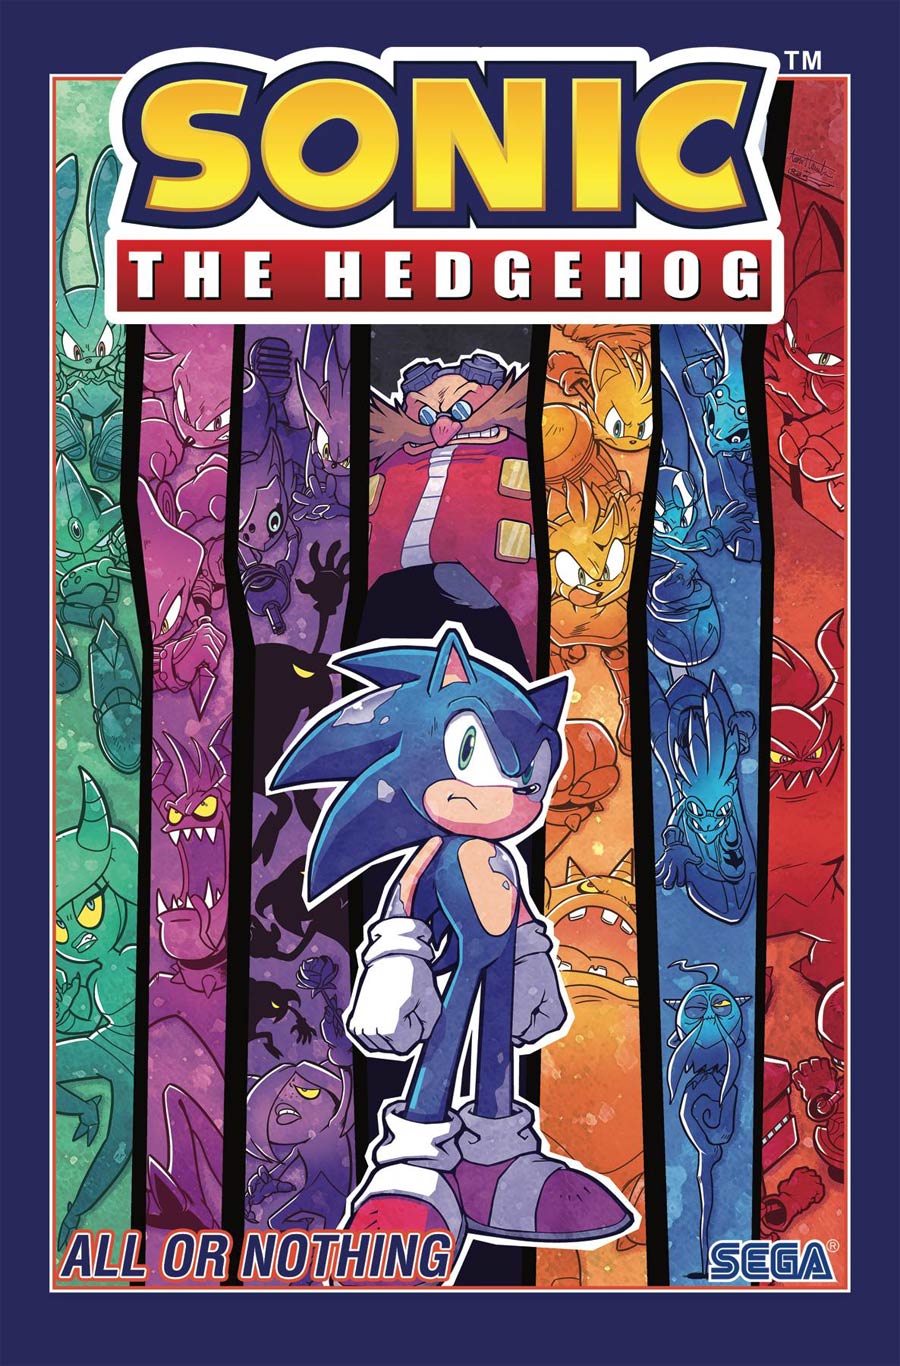 Sonic The Hedgehog (IDW) Vol 7 All Or Nothing TP